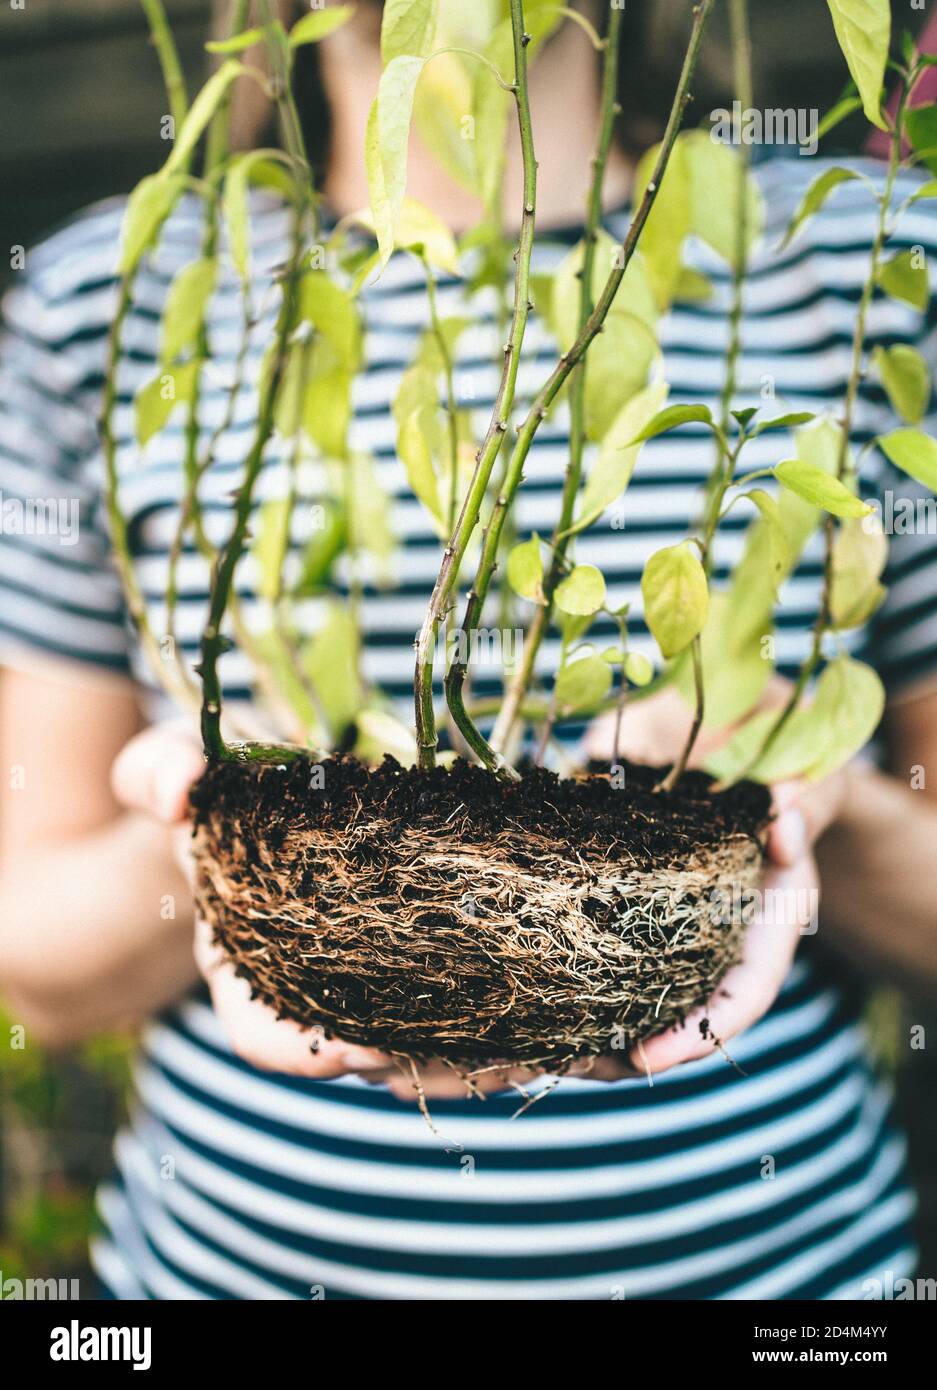 Cropped view of human hands holding a plant with visible roots and soil Stock Photo